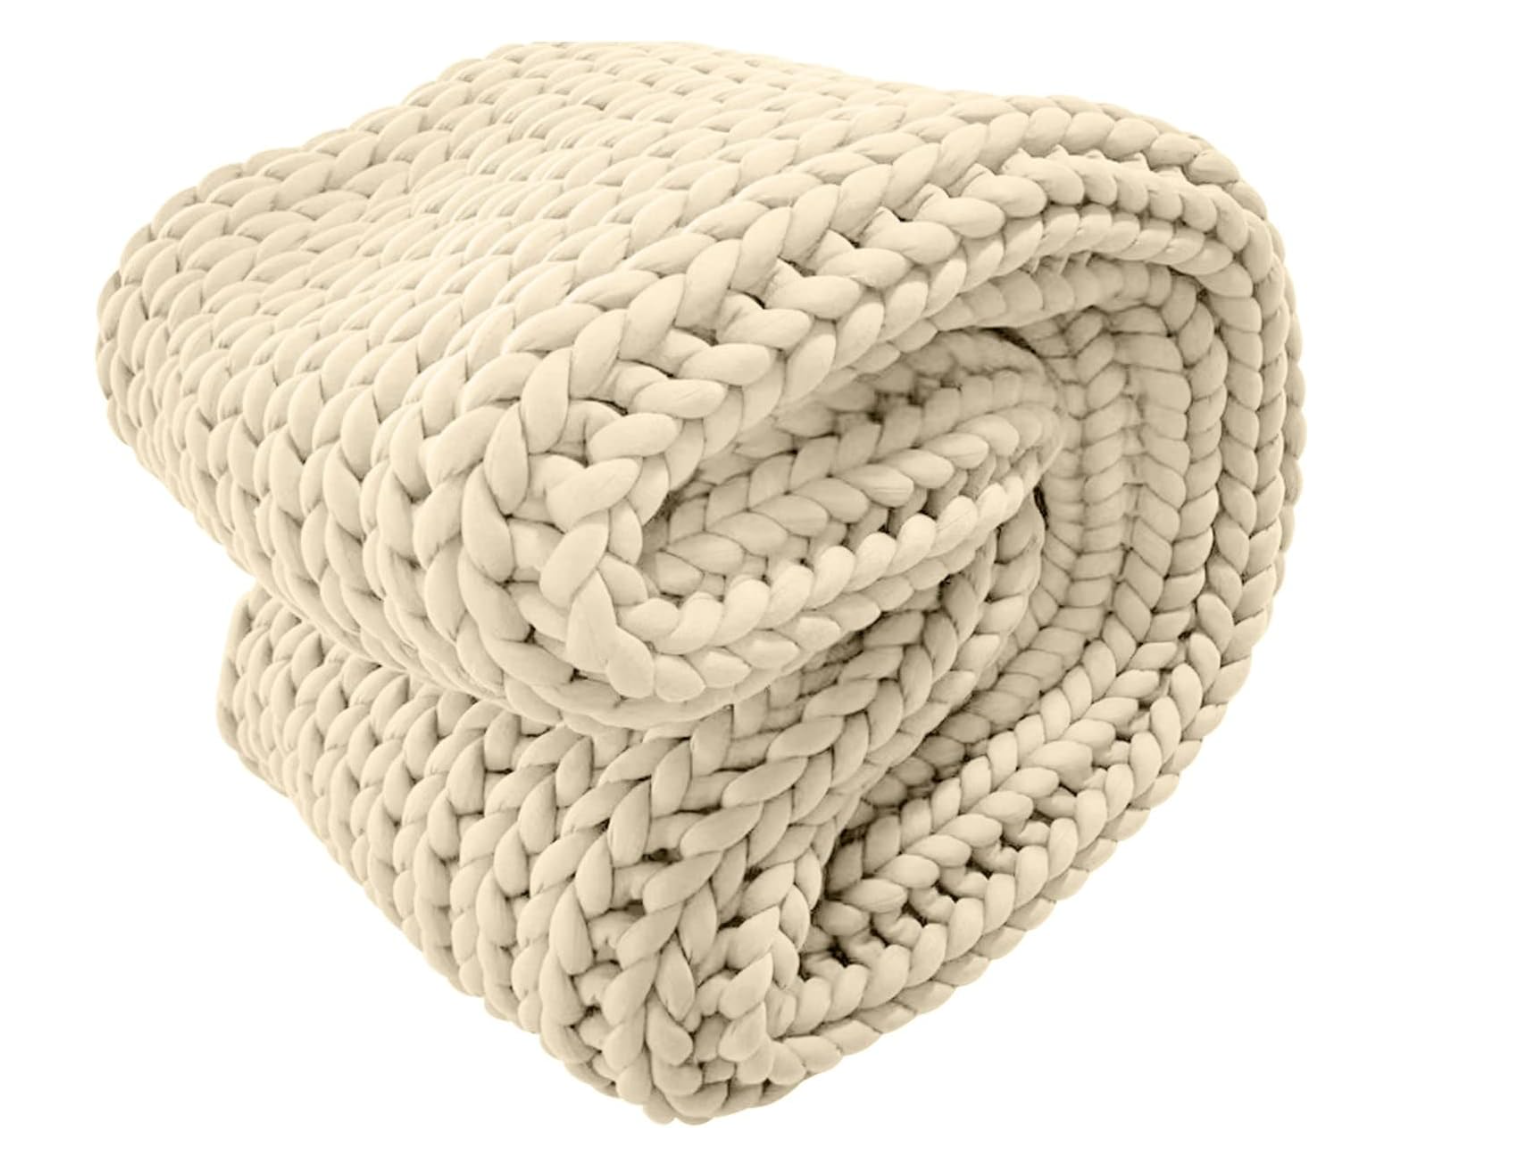  Royal Comfort Chunky Knit Weighted Blanket (Copy)